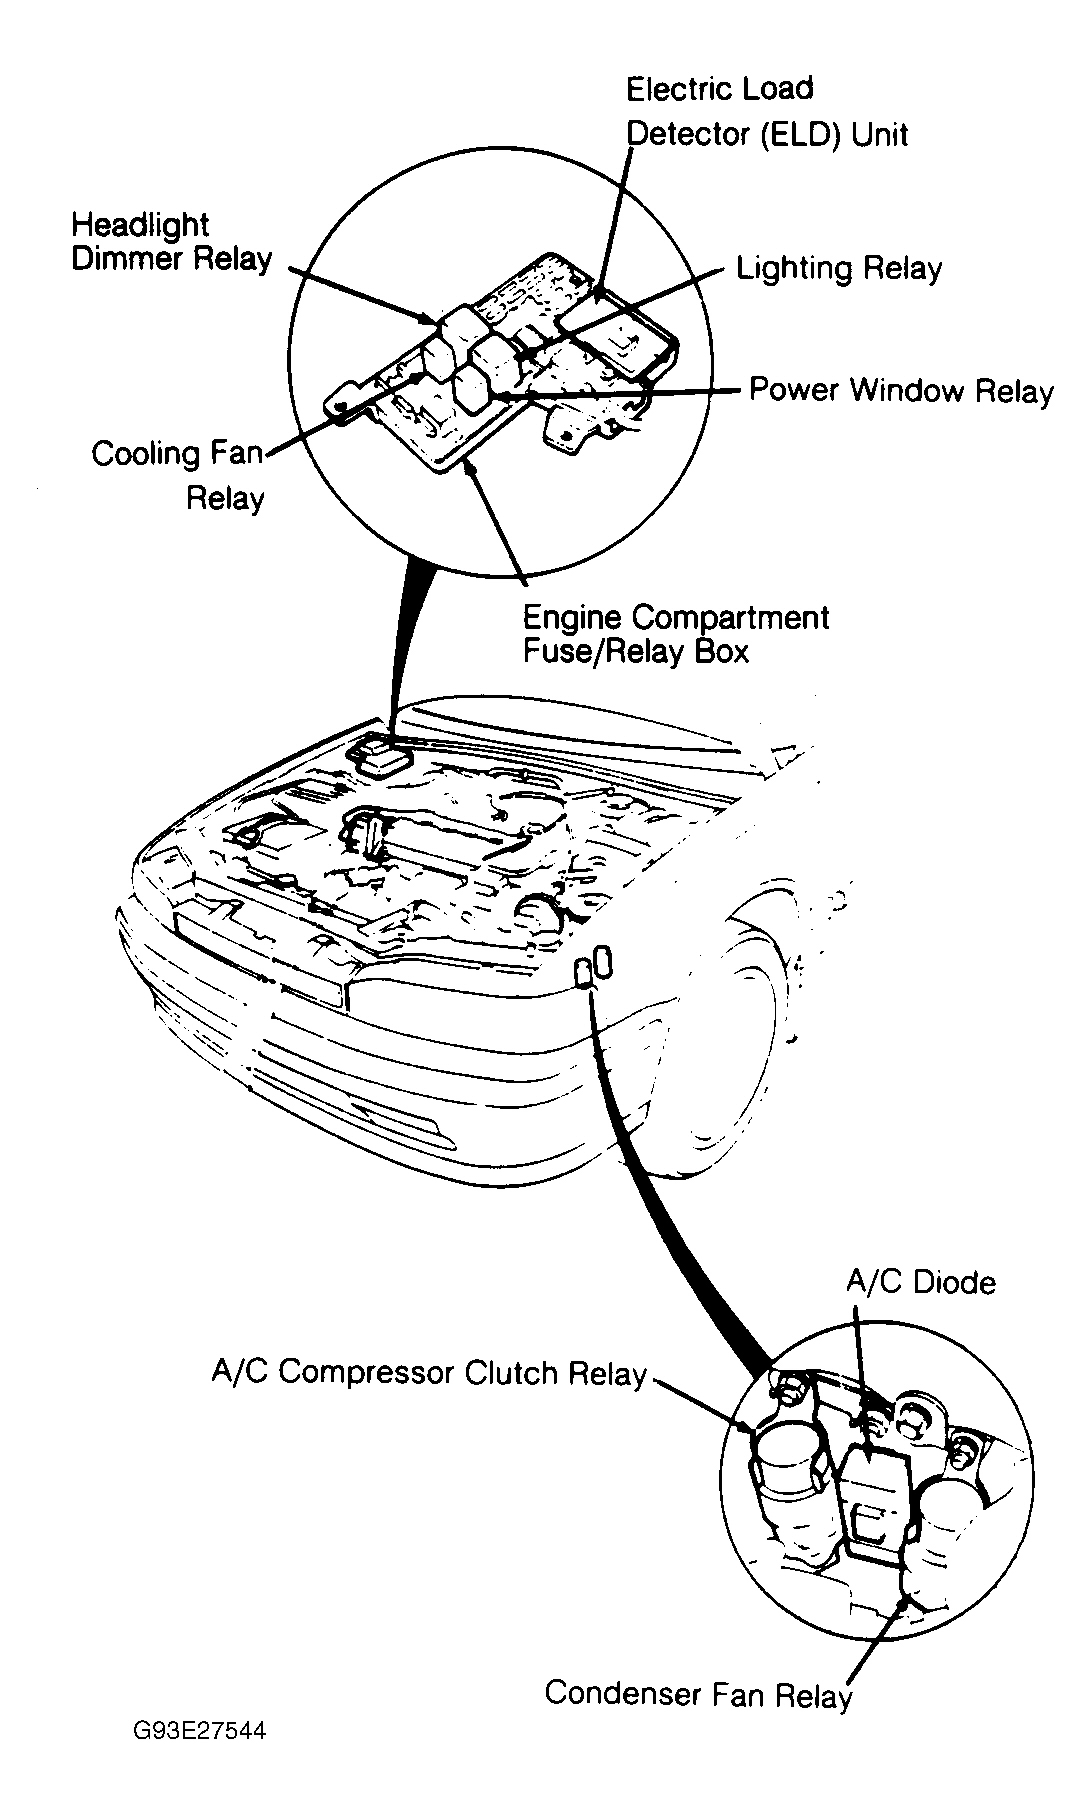 Honda Accord DX 1992 - Component Locations -  Component Locations (1 Of 12)